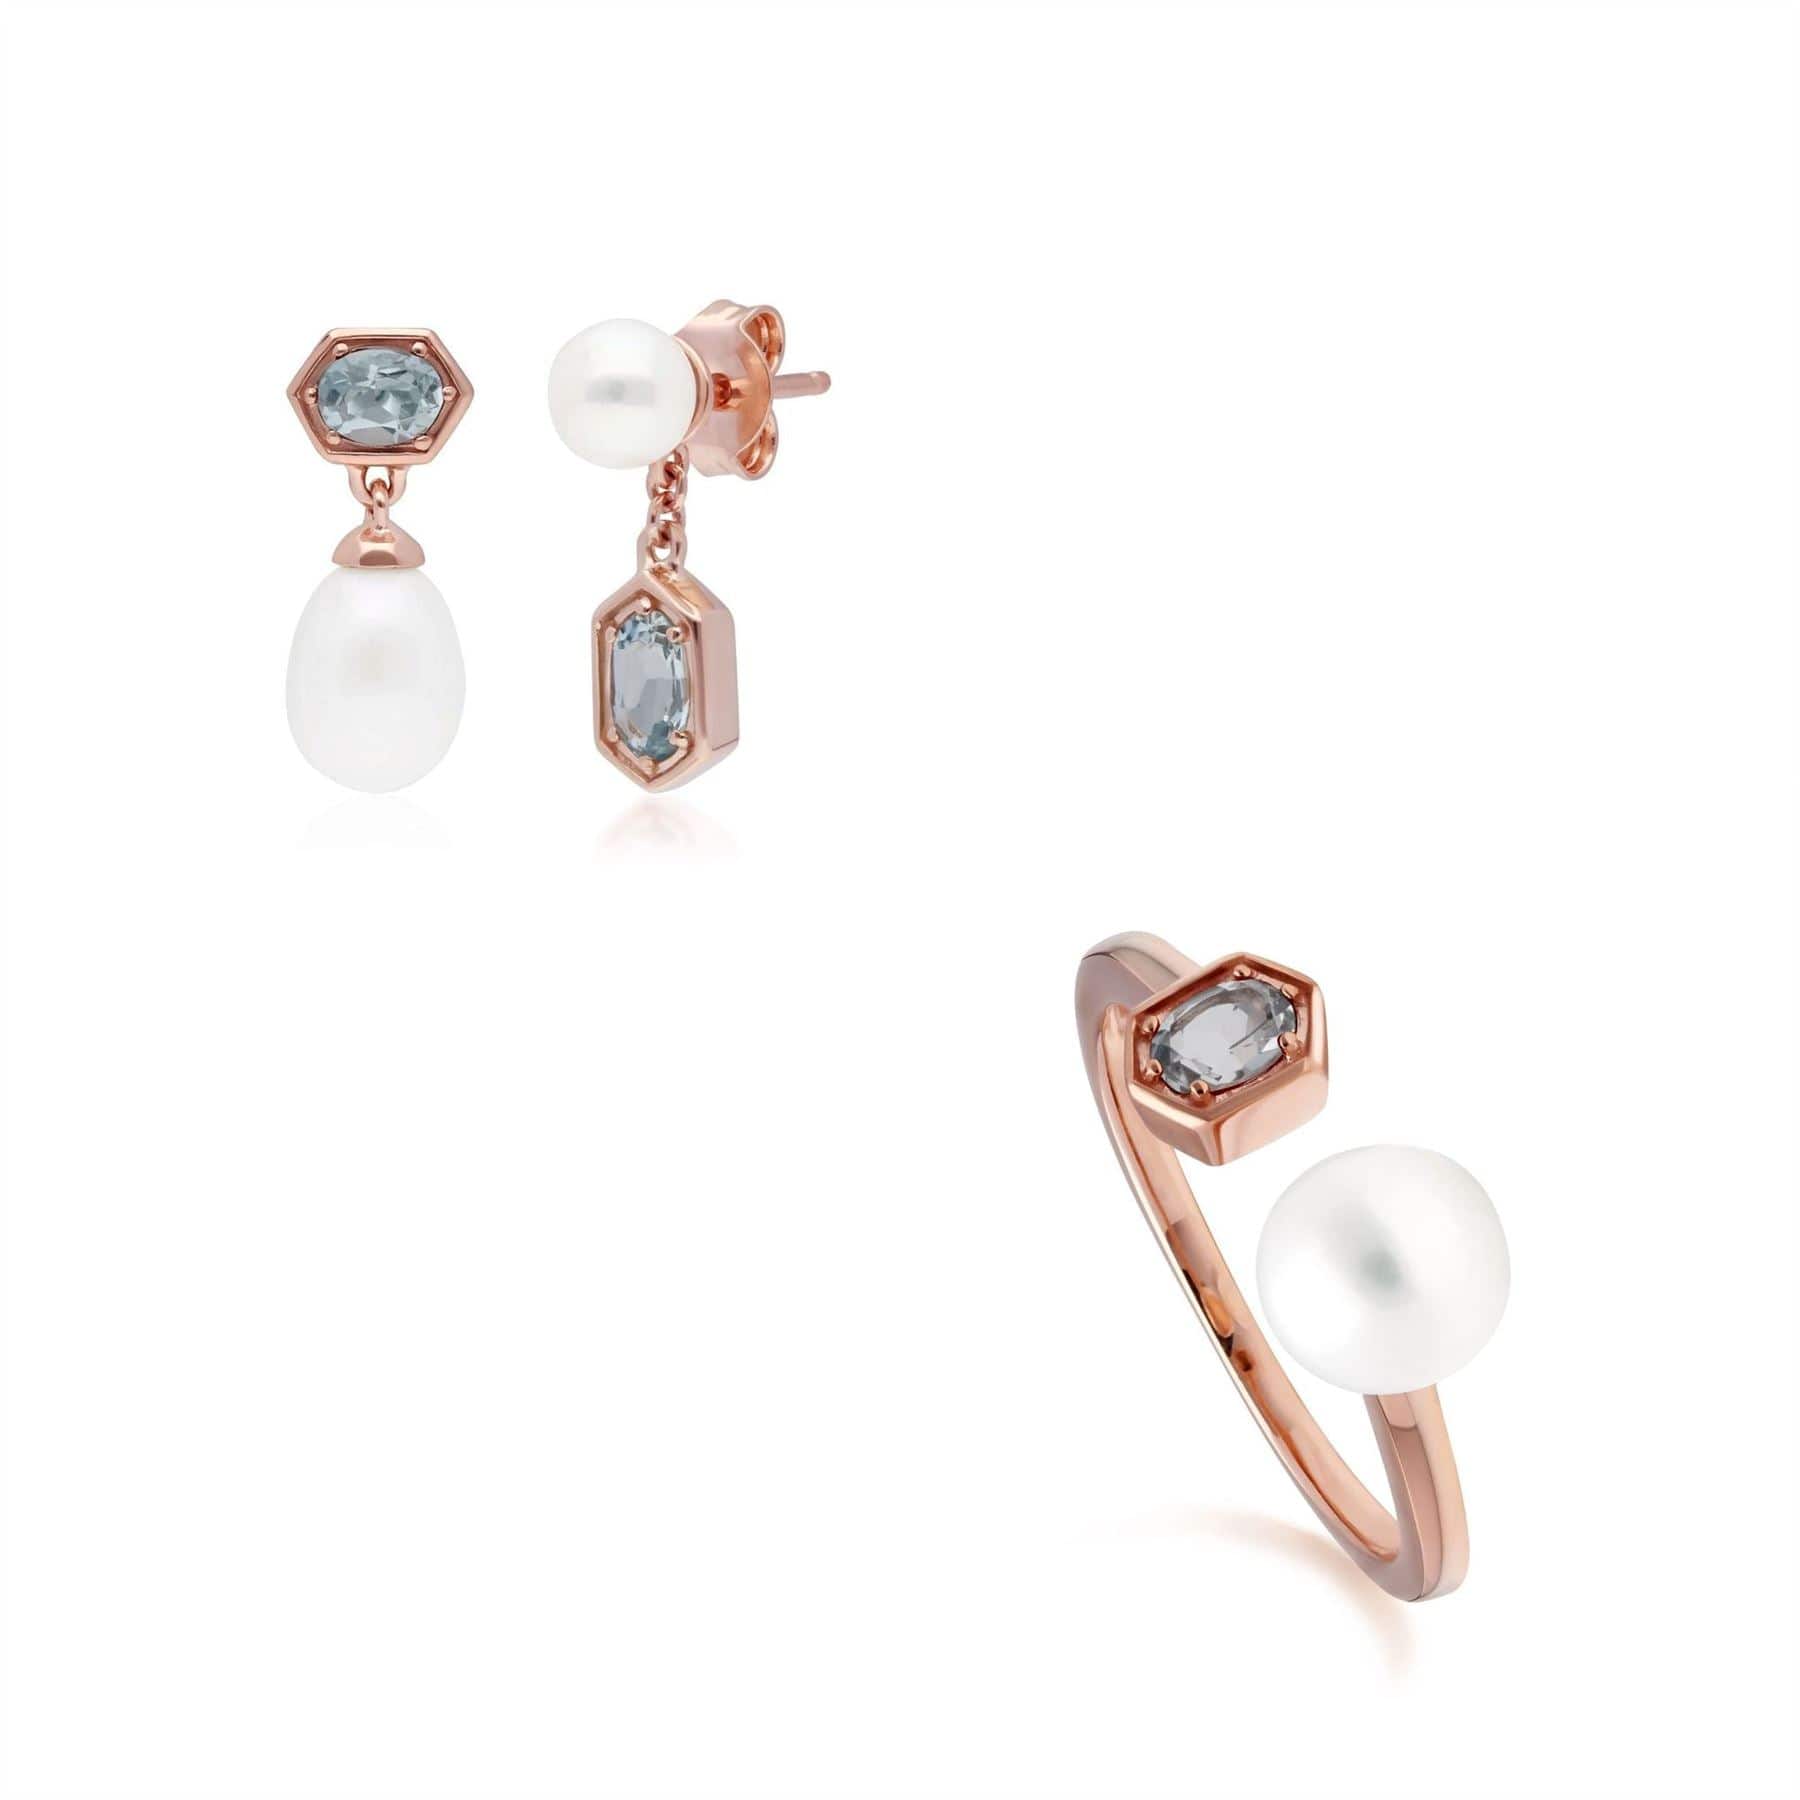 Image of Modern Pearl & Aquamarine Earring & Ring Set in Rose Gold Plated Silver